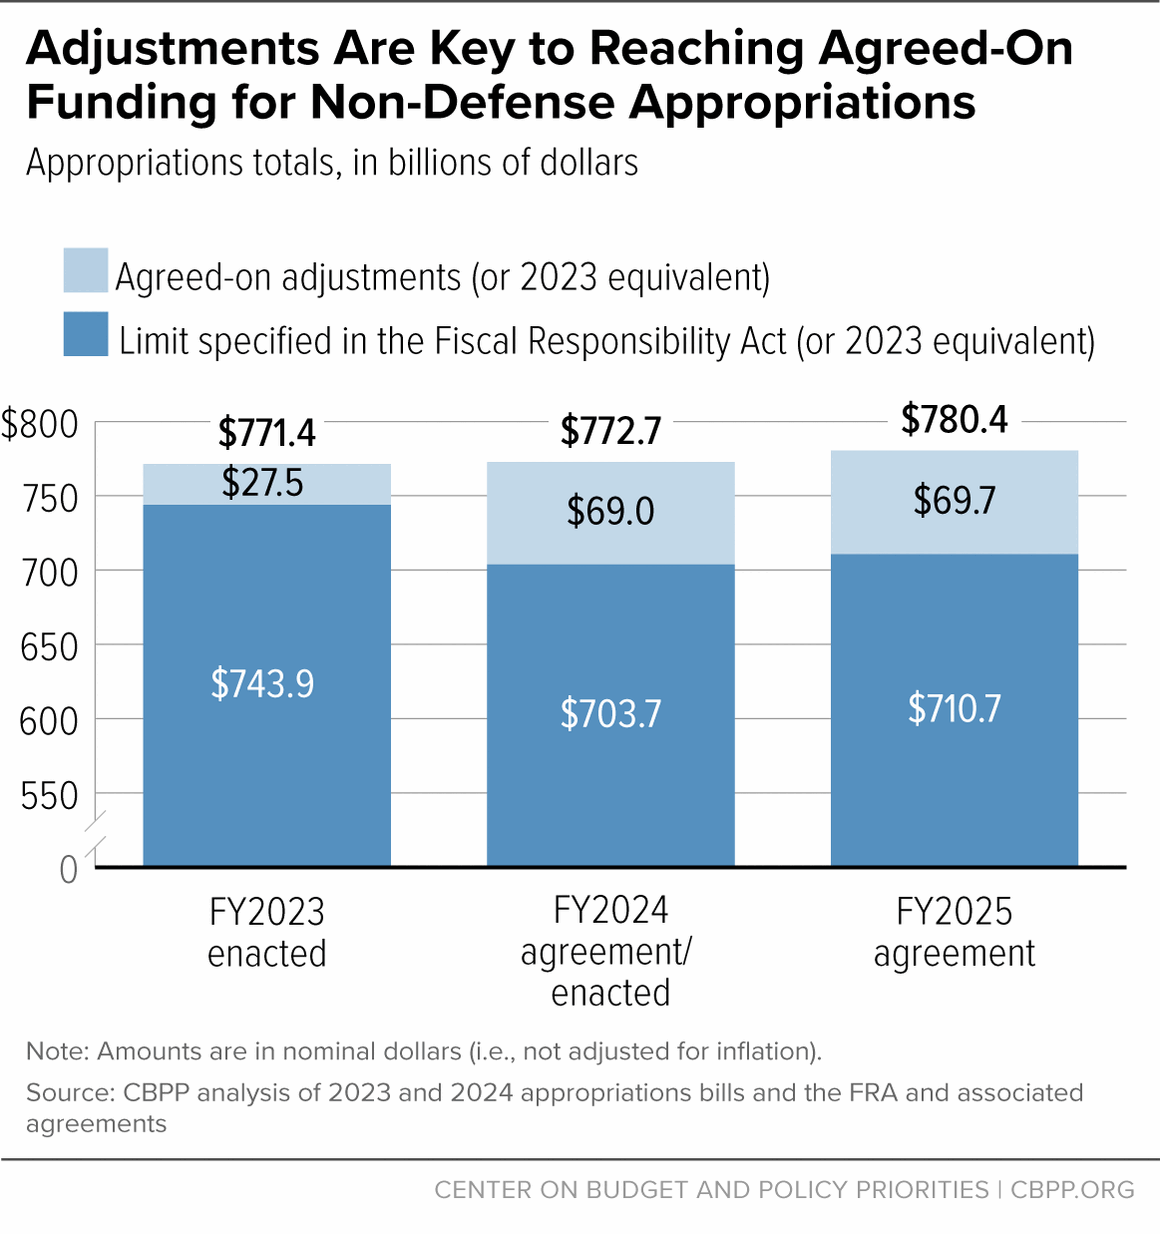 Adjustments Are Key to Reaching Agreed-On Funding for Non-Defense Appropriations